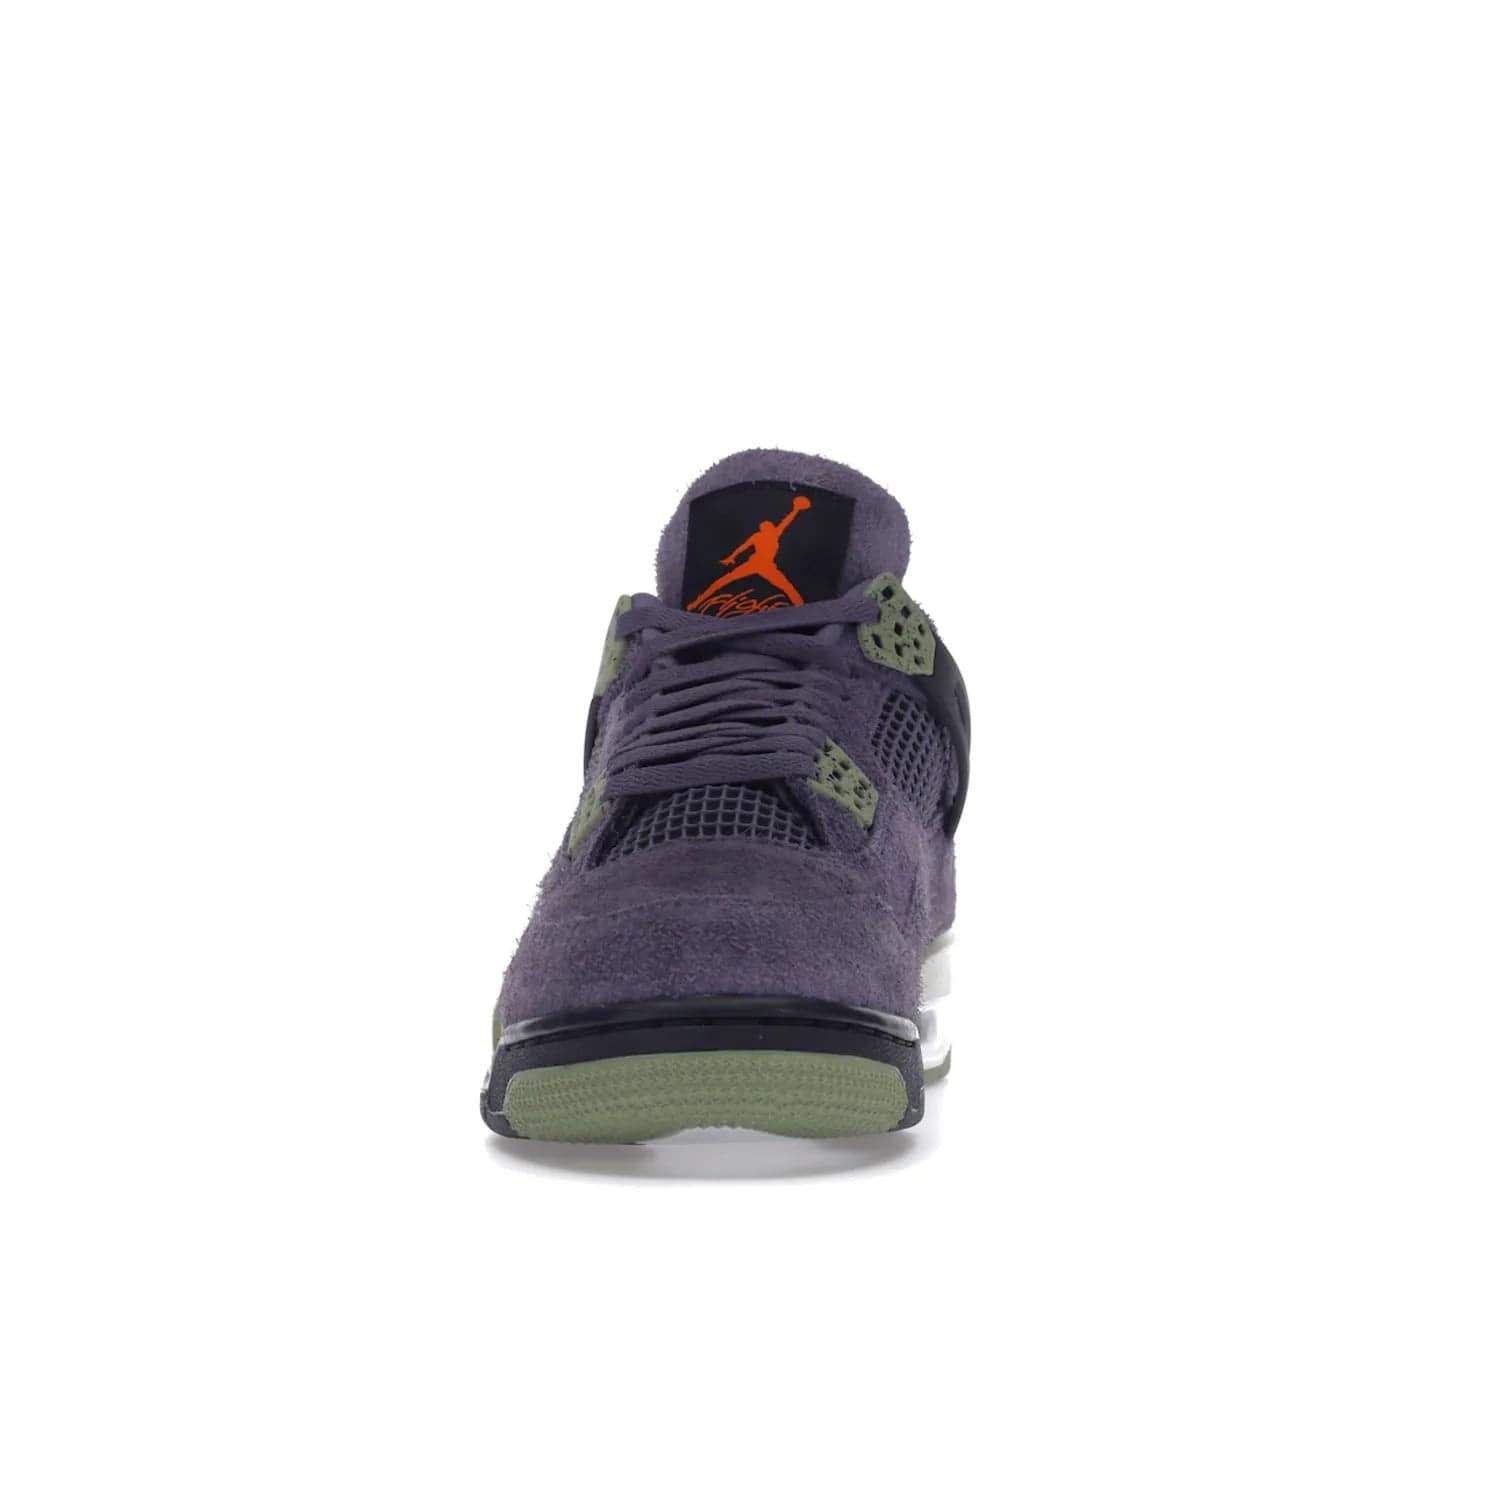 Jordan 4 Retro Canyon Purple (Women's) - Image 11 - Only at www.BallersClubKickz.com - New Air Jordan 4 Retro Canyon Purple W sneaker features shaggy purple suede, lime highlights & safety orange Jumpman branding. Classic ankle-hugging silhouette with modern colors released 15/10/2022.